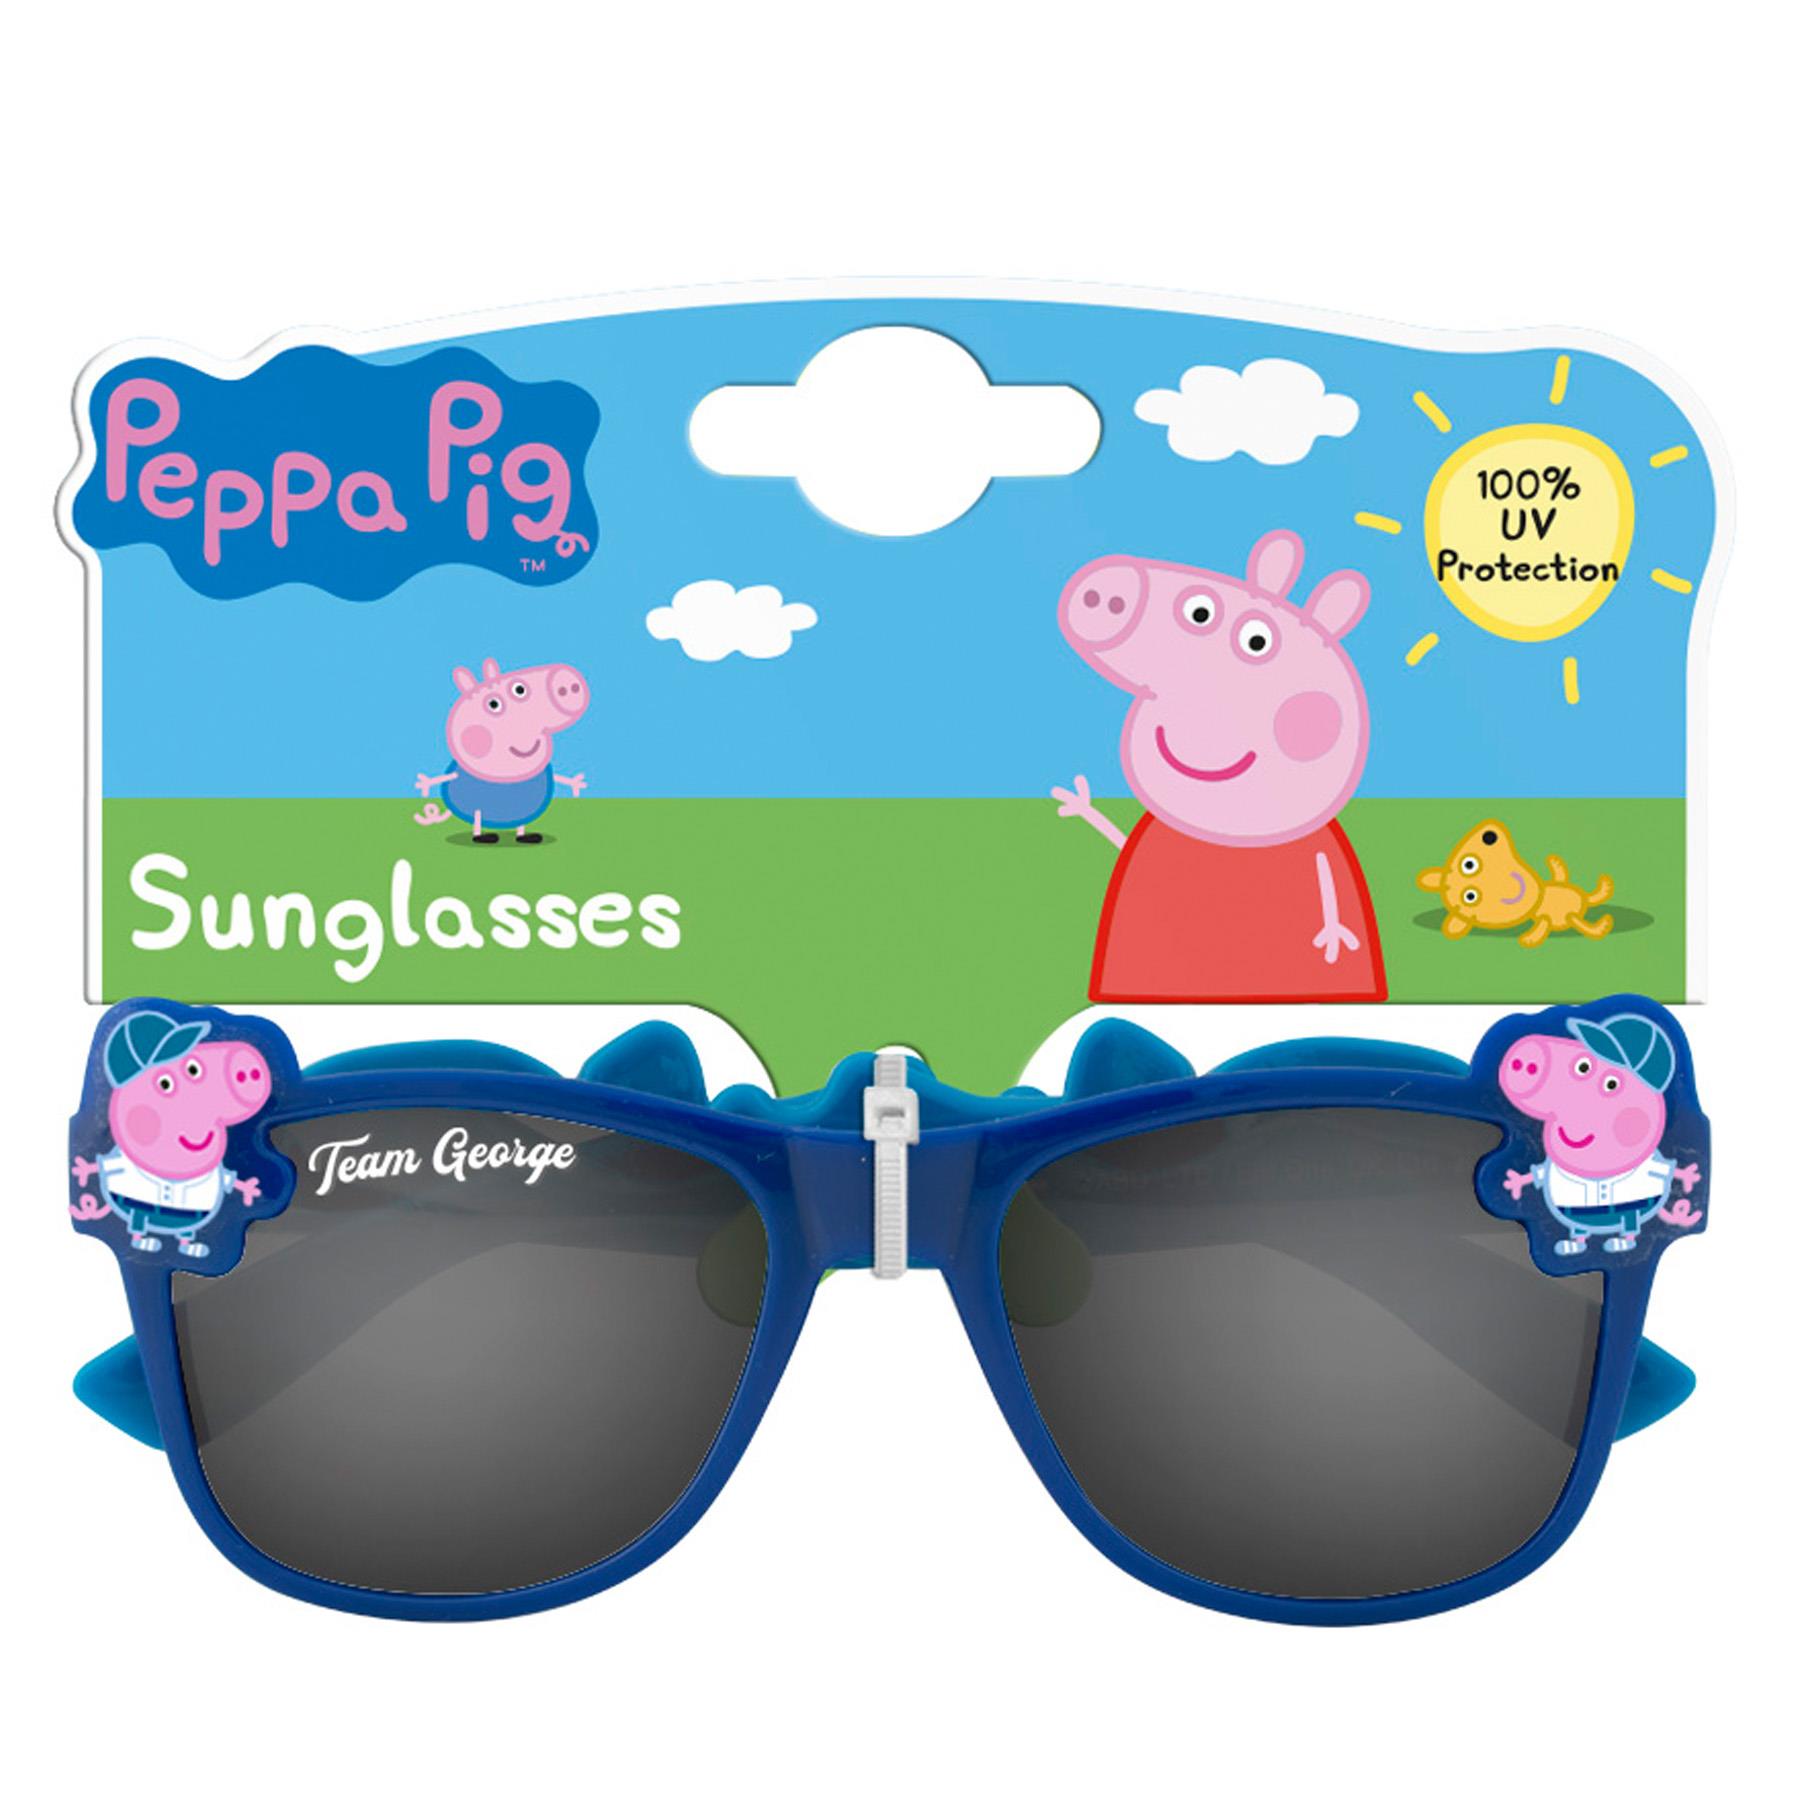 Peppa Pig Children's Character Sunglasses UV protection for Holiday George - PEPPA6